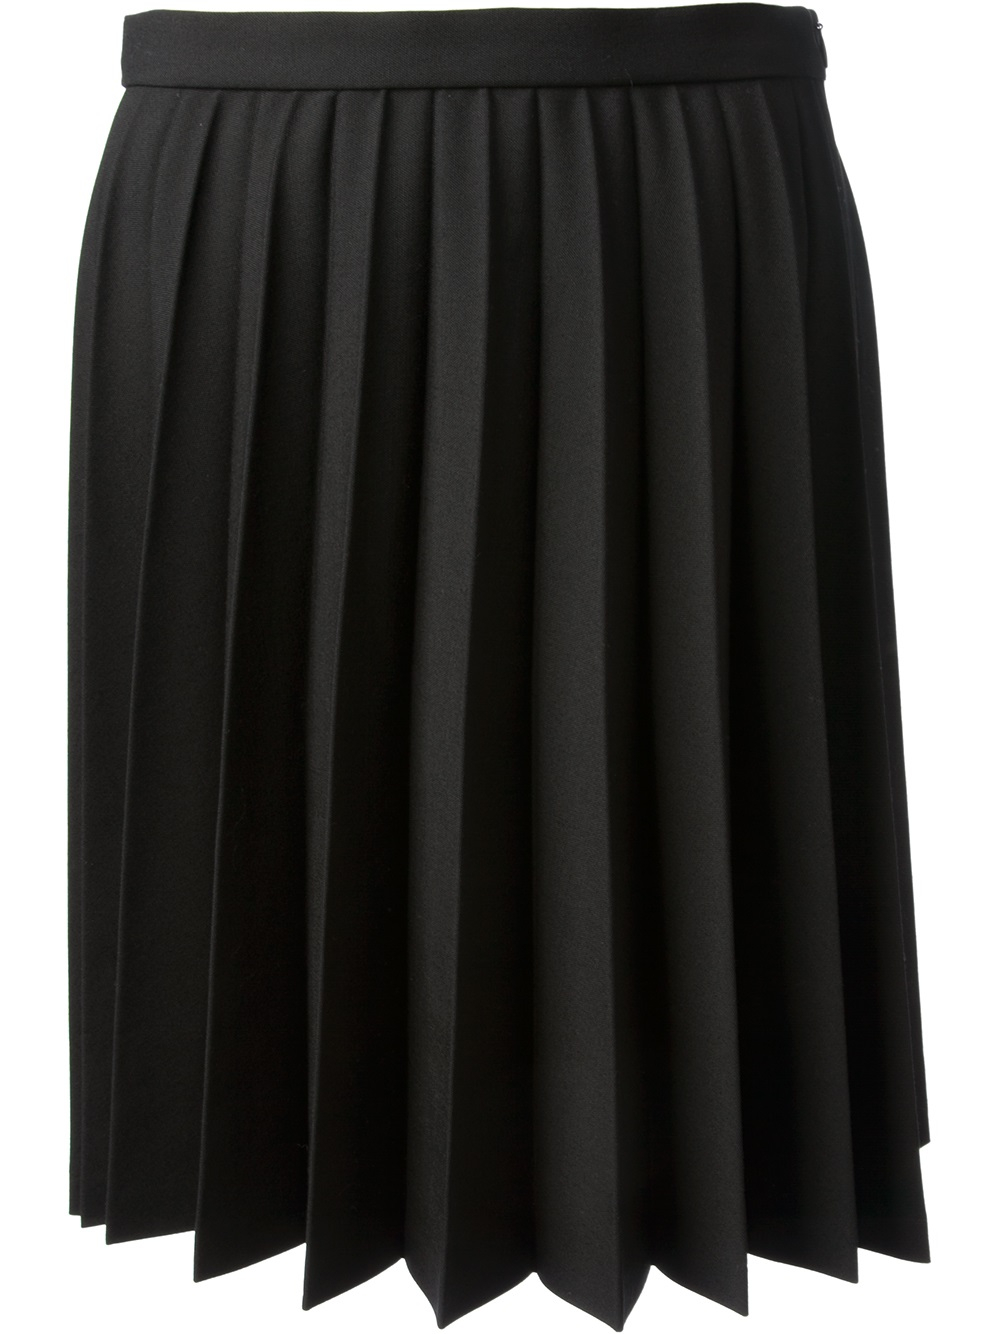 Lyst - Red Valentino 'Sunray' Pleated Skirt in Black